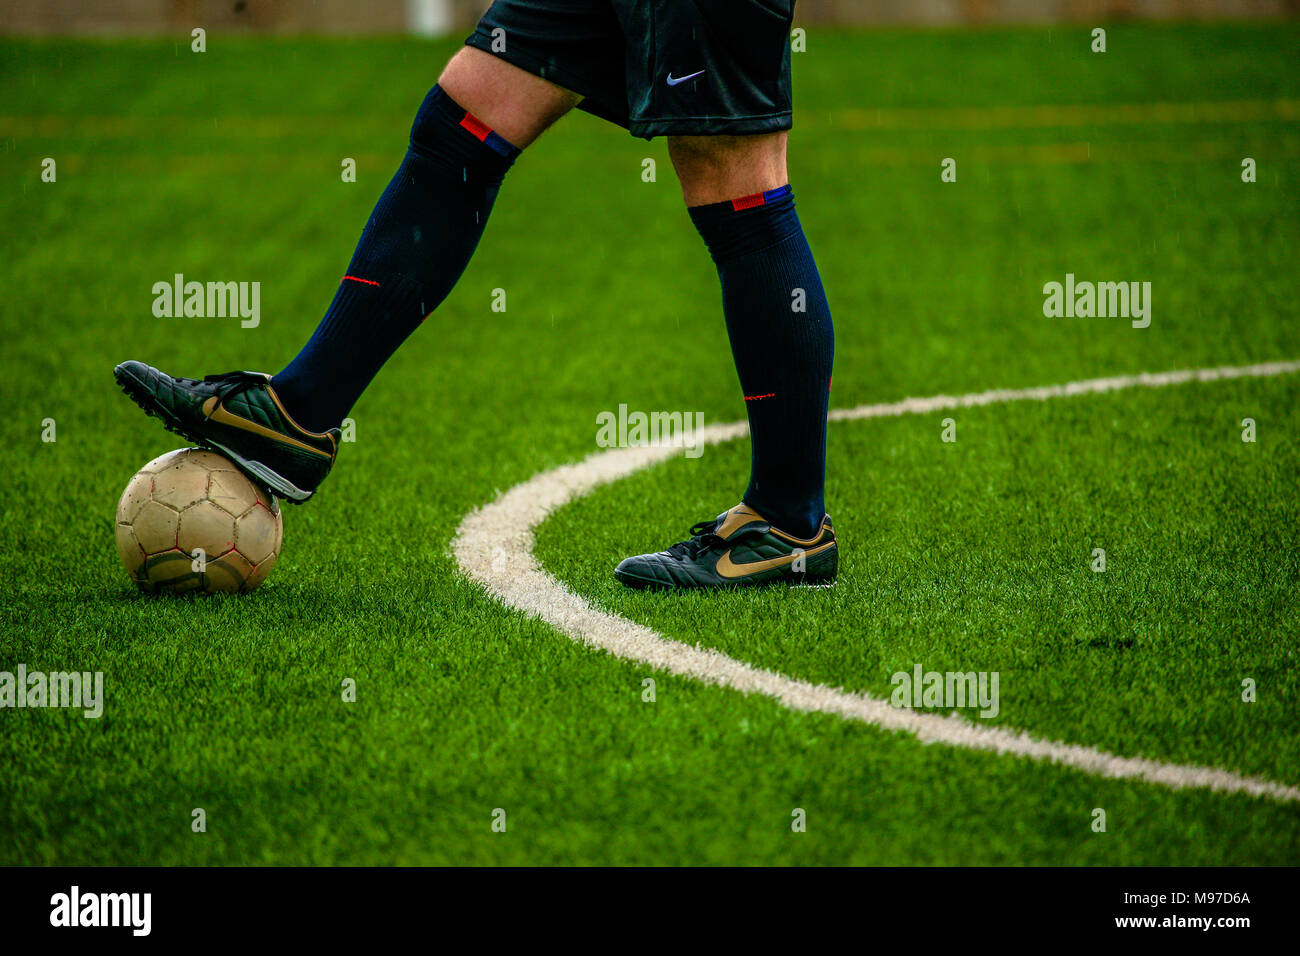 A referee in black uniform with is boot touching the ball is about to start the match, Barcelona, Spain Stock Photo